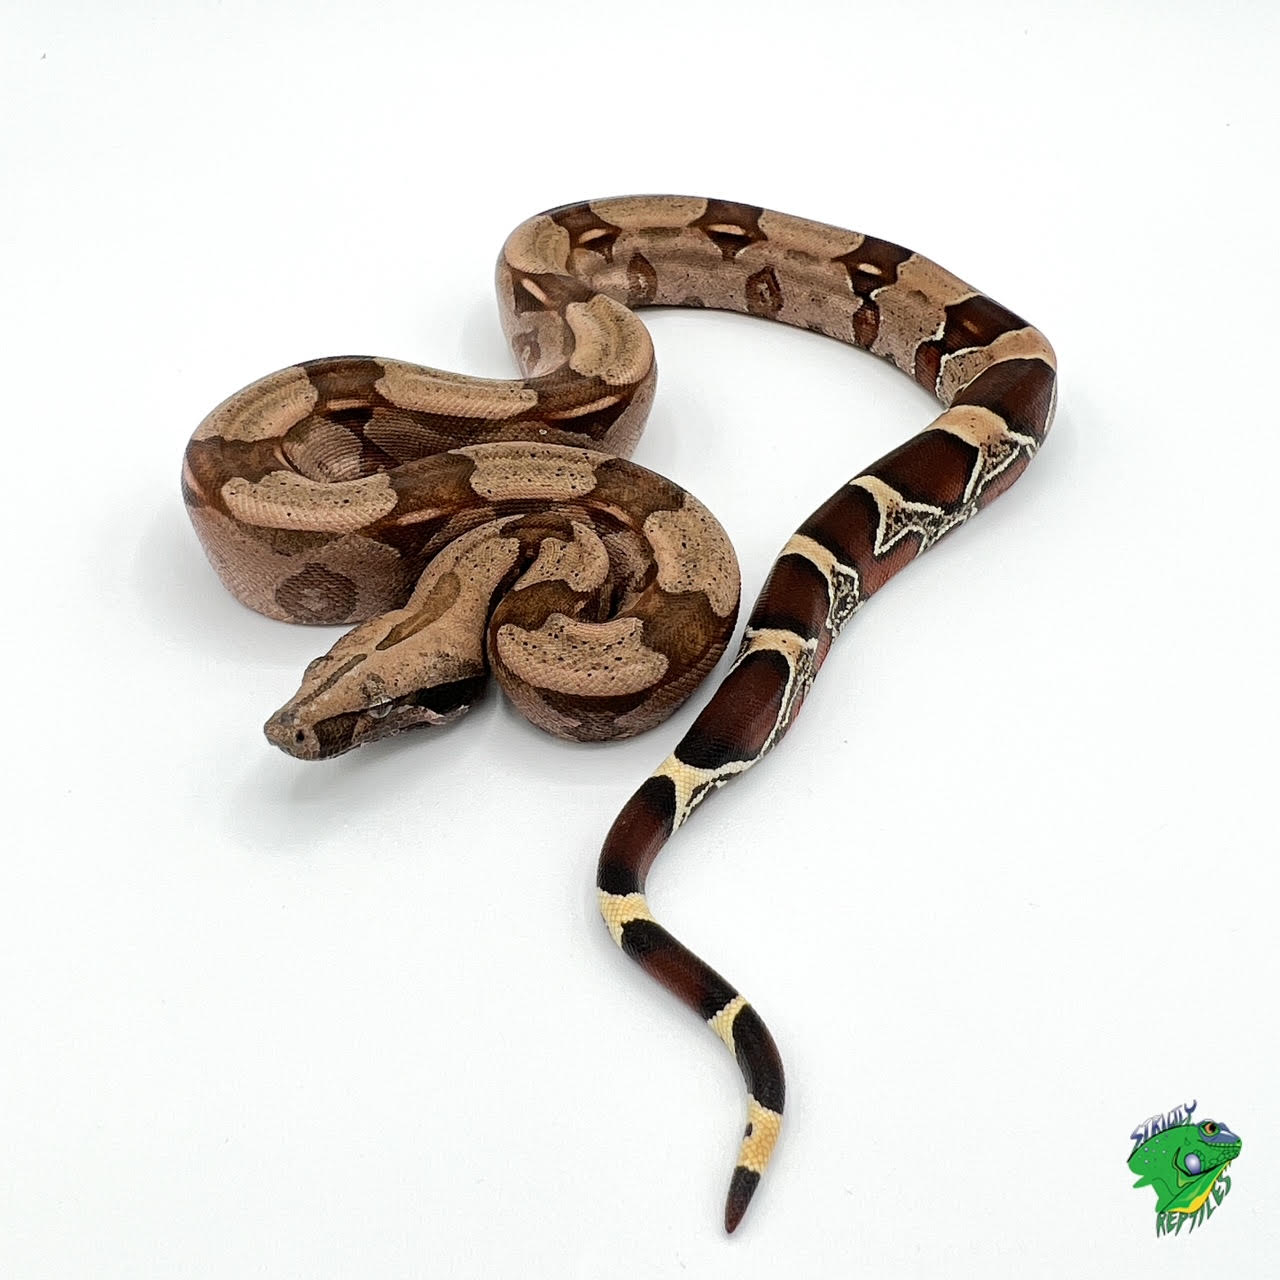 Red-Tailed Boa Constrictor – Saginaw Children's Zoo